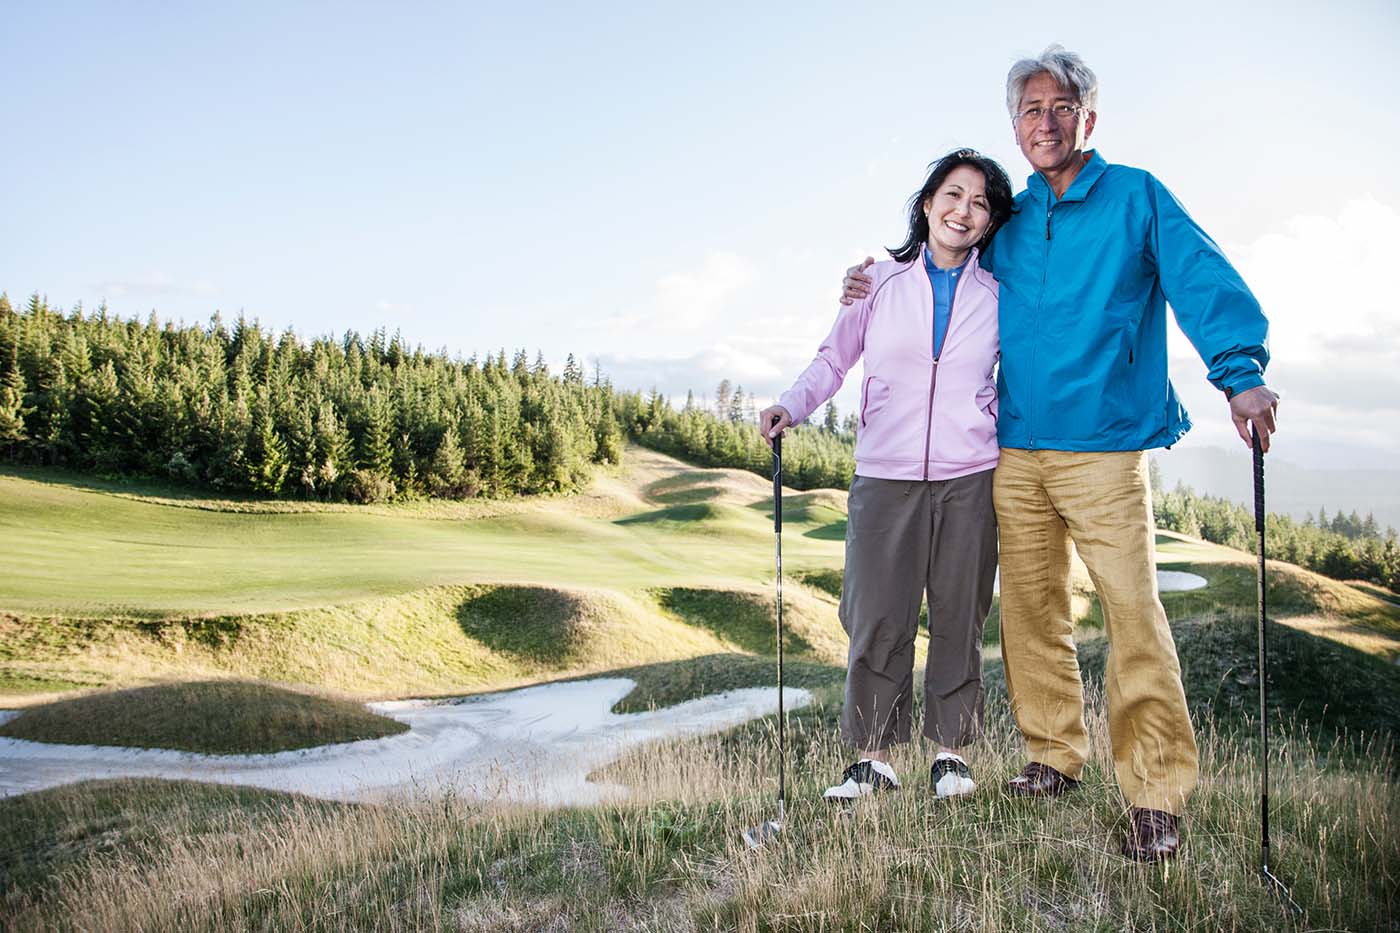 55+ couple enjoy the great outdoors by playing golf on a lakeview golf course for their daily activities